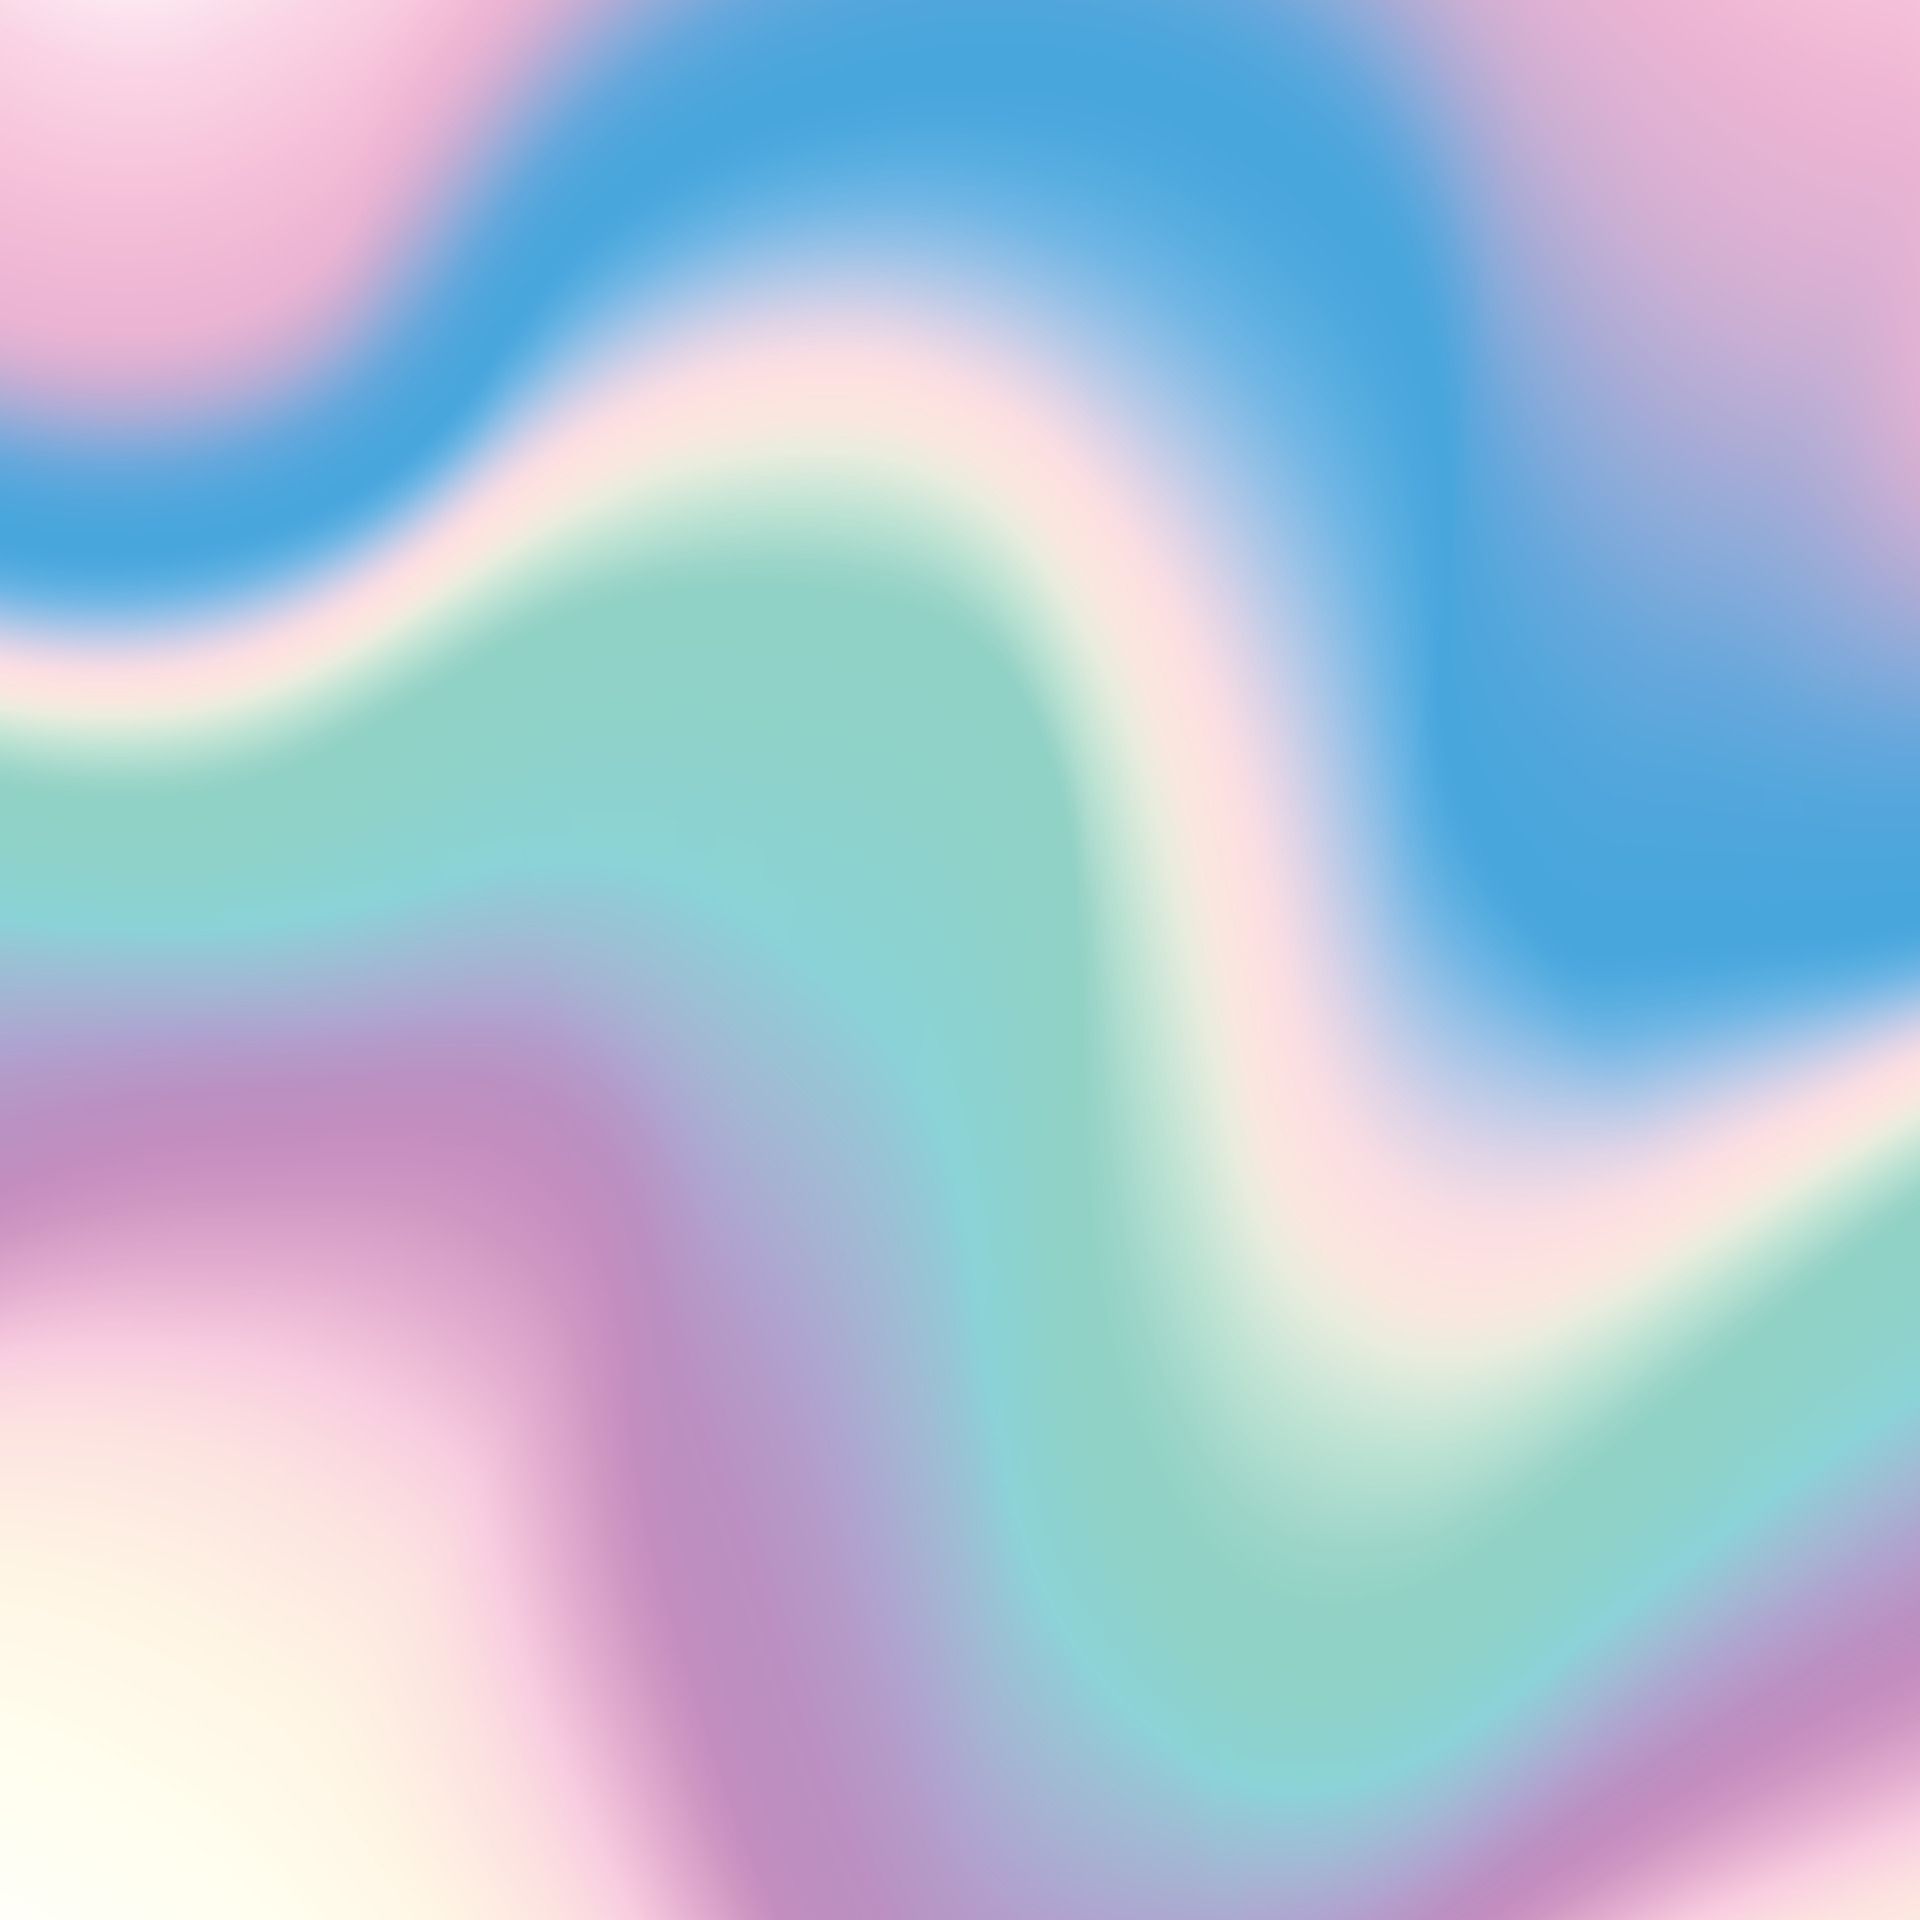 A pastel abstract background with a wavy pattern - Iridescent, holographic